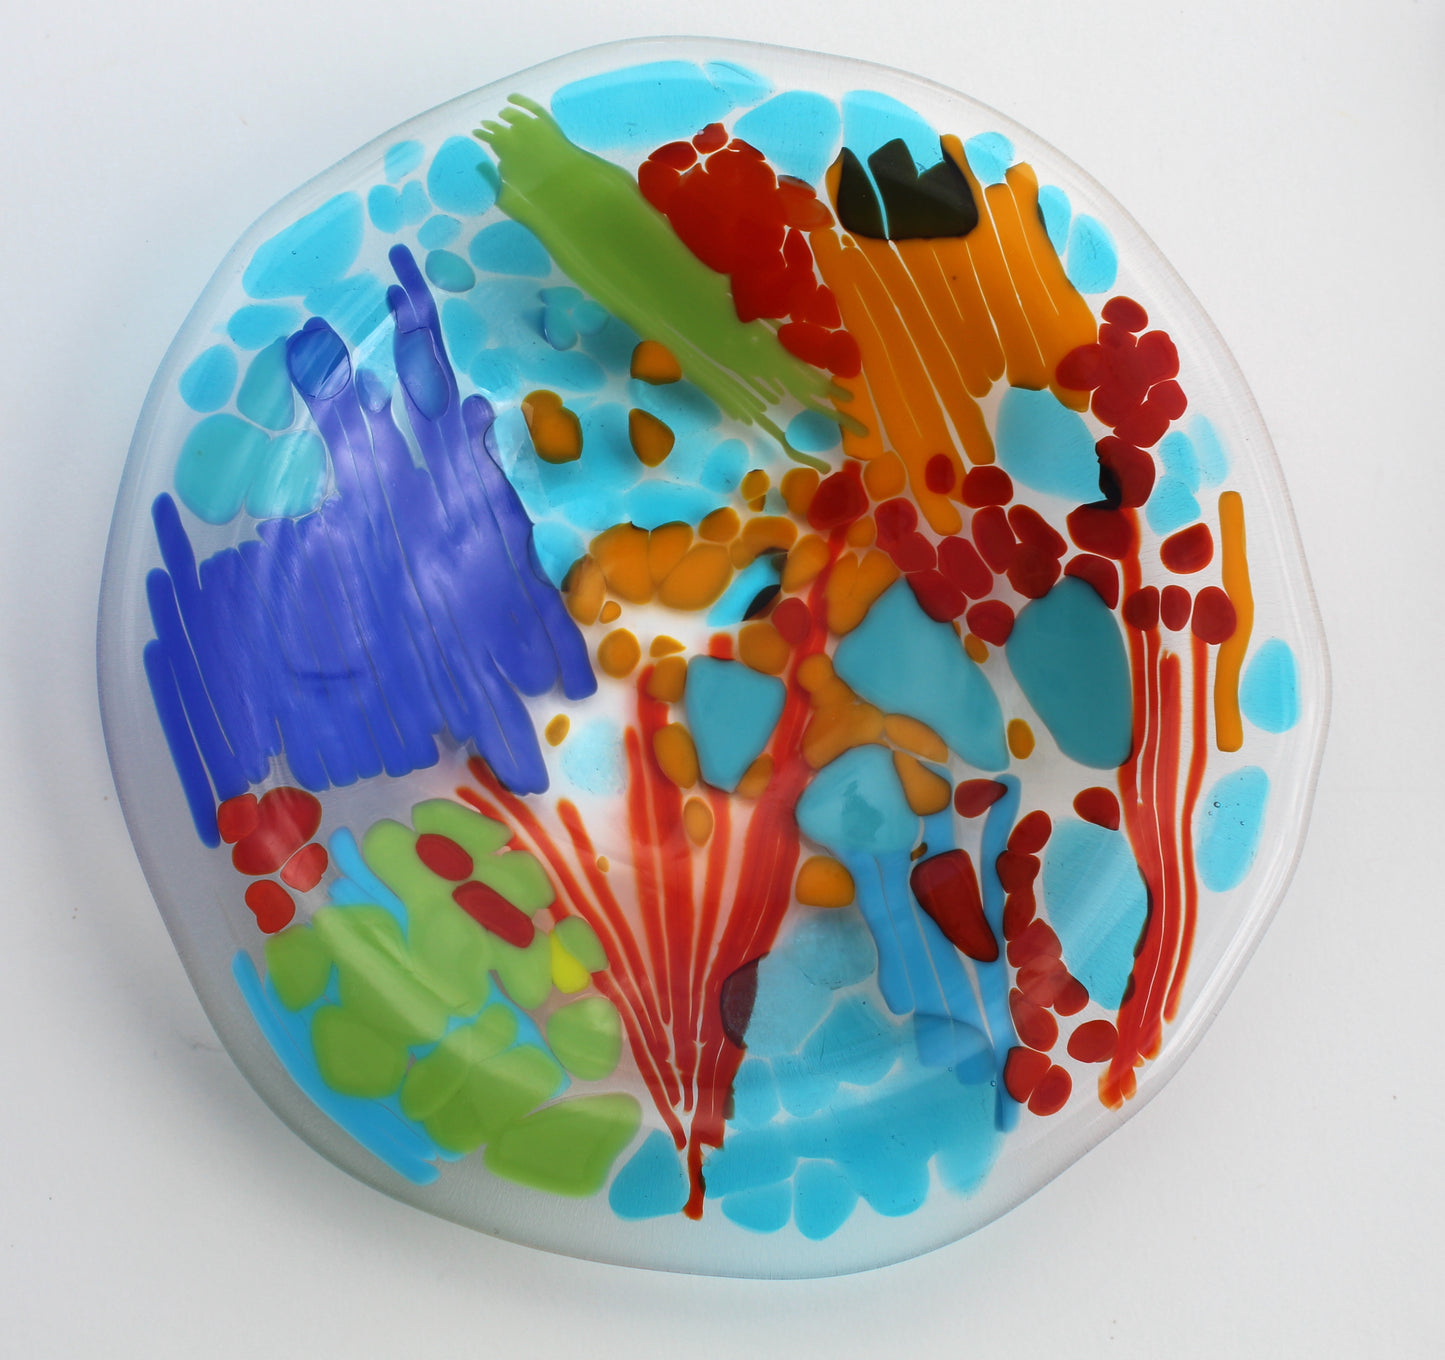 Glass bowl with sections of mostly blues with spaces of orange, red, and green